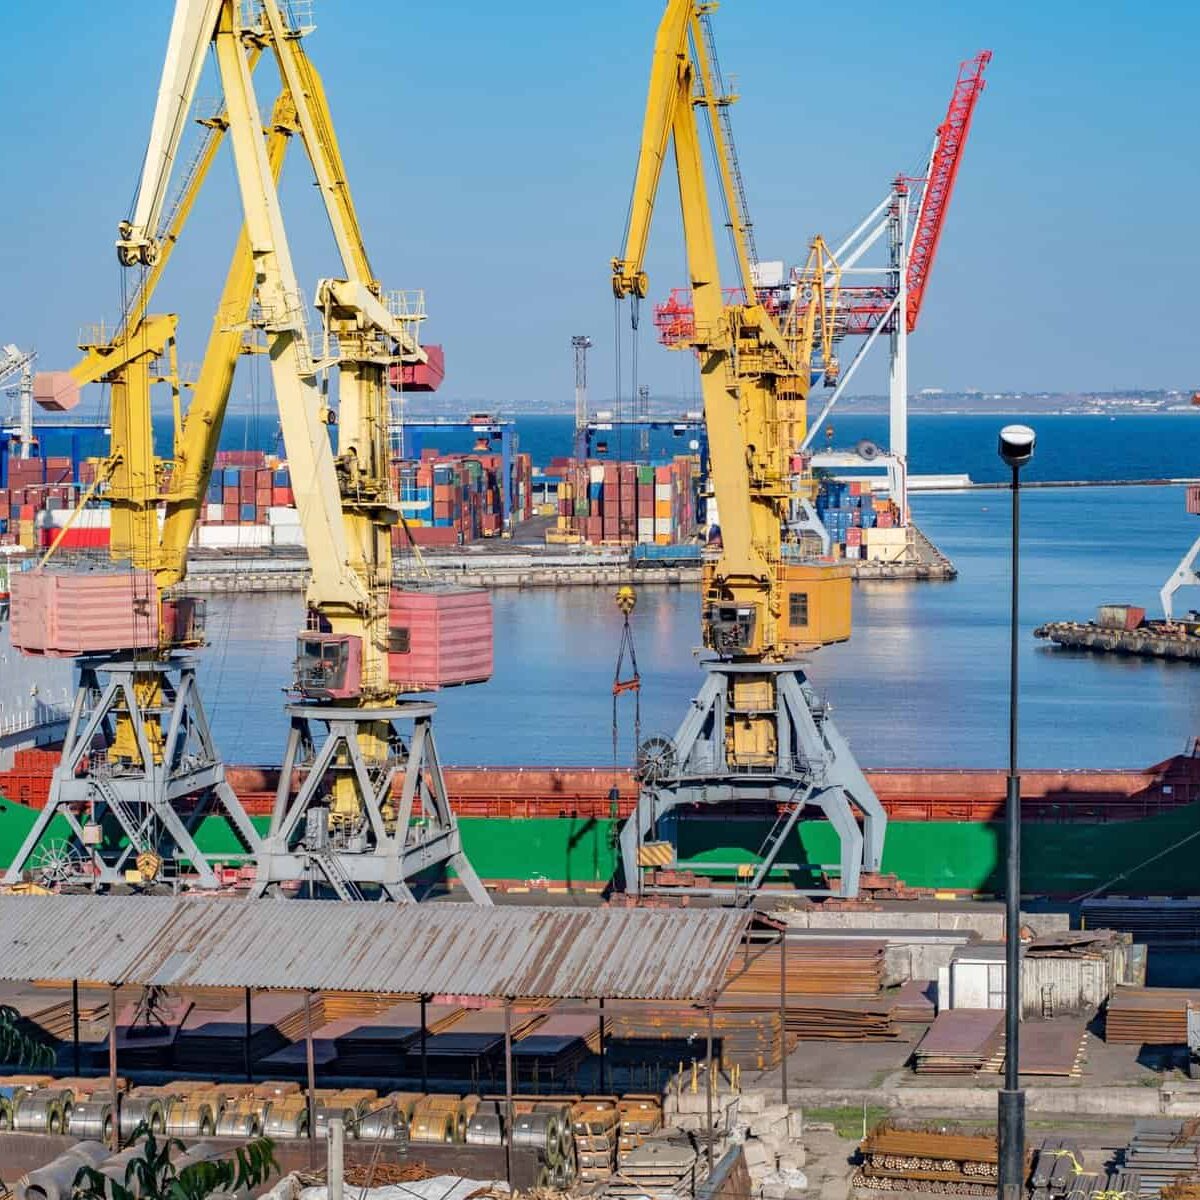 Industrial seaport with heavy loading machinery and metal cargo goods and containers. Port harbor with yellow shore cranes